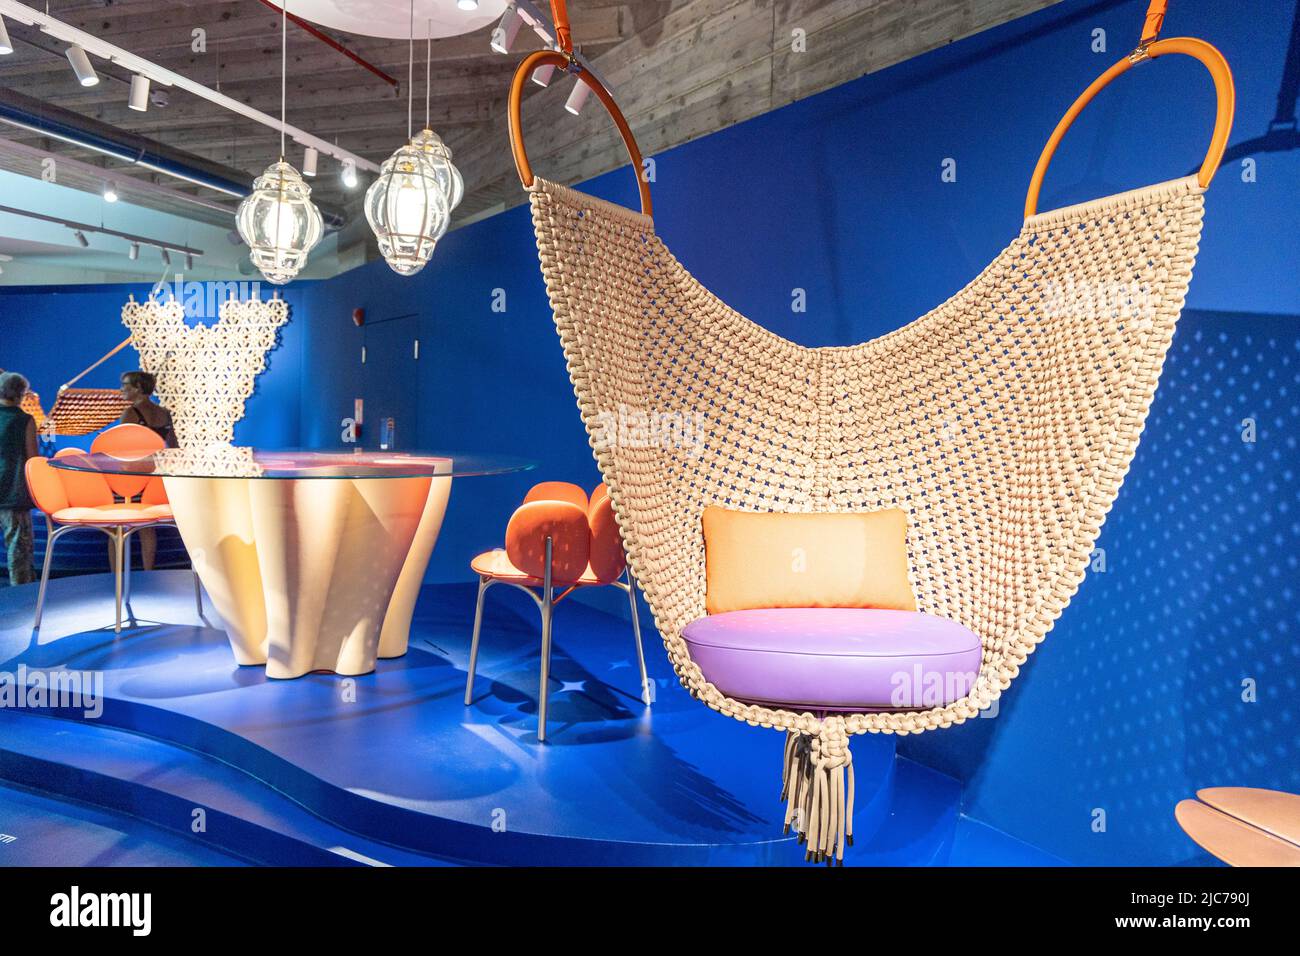 The Objets Nomades by Louis Vuitton at Fuorisalone 2023